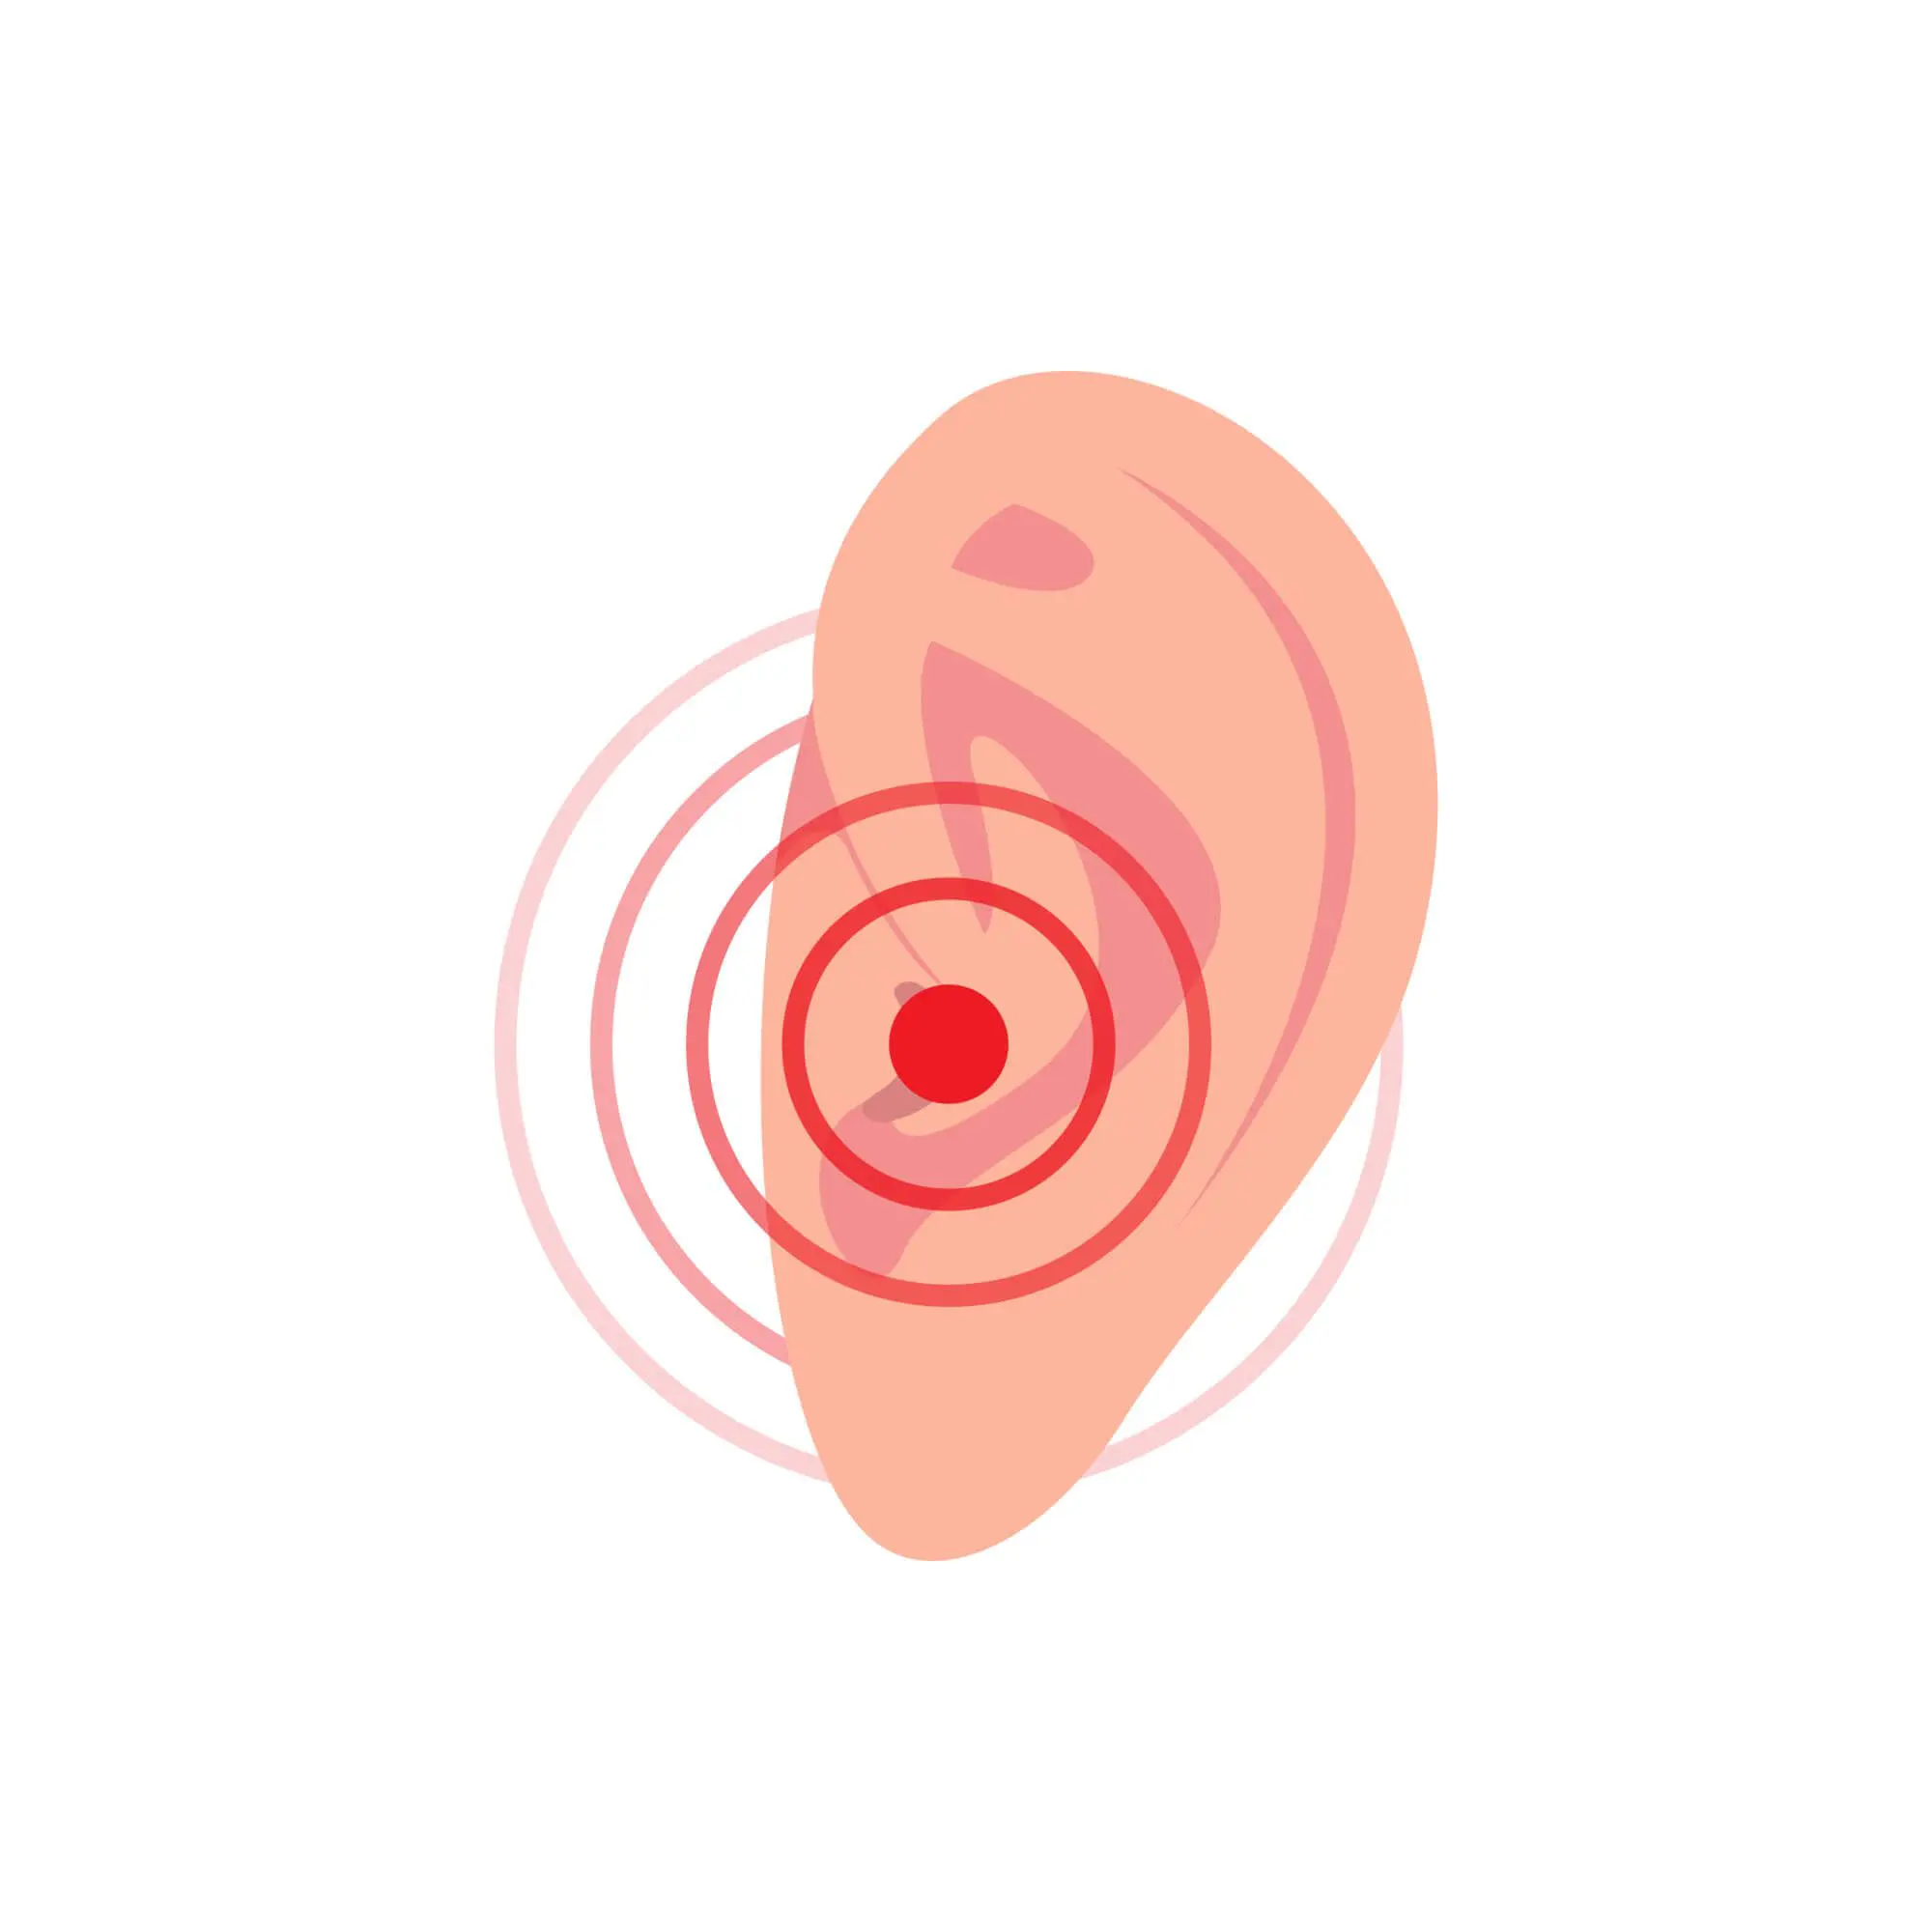 Tinnitus causes ringing or buzzing in the ears.